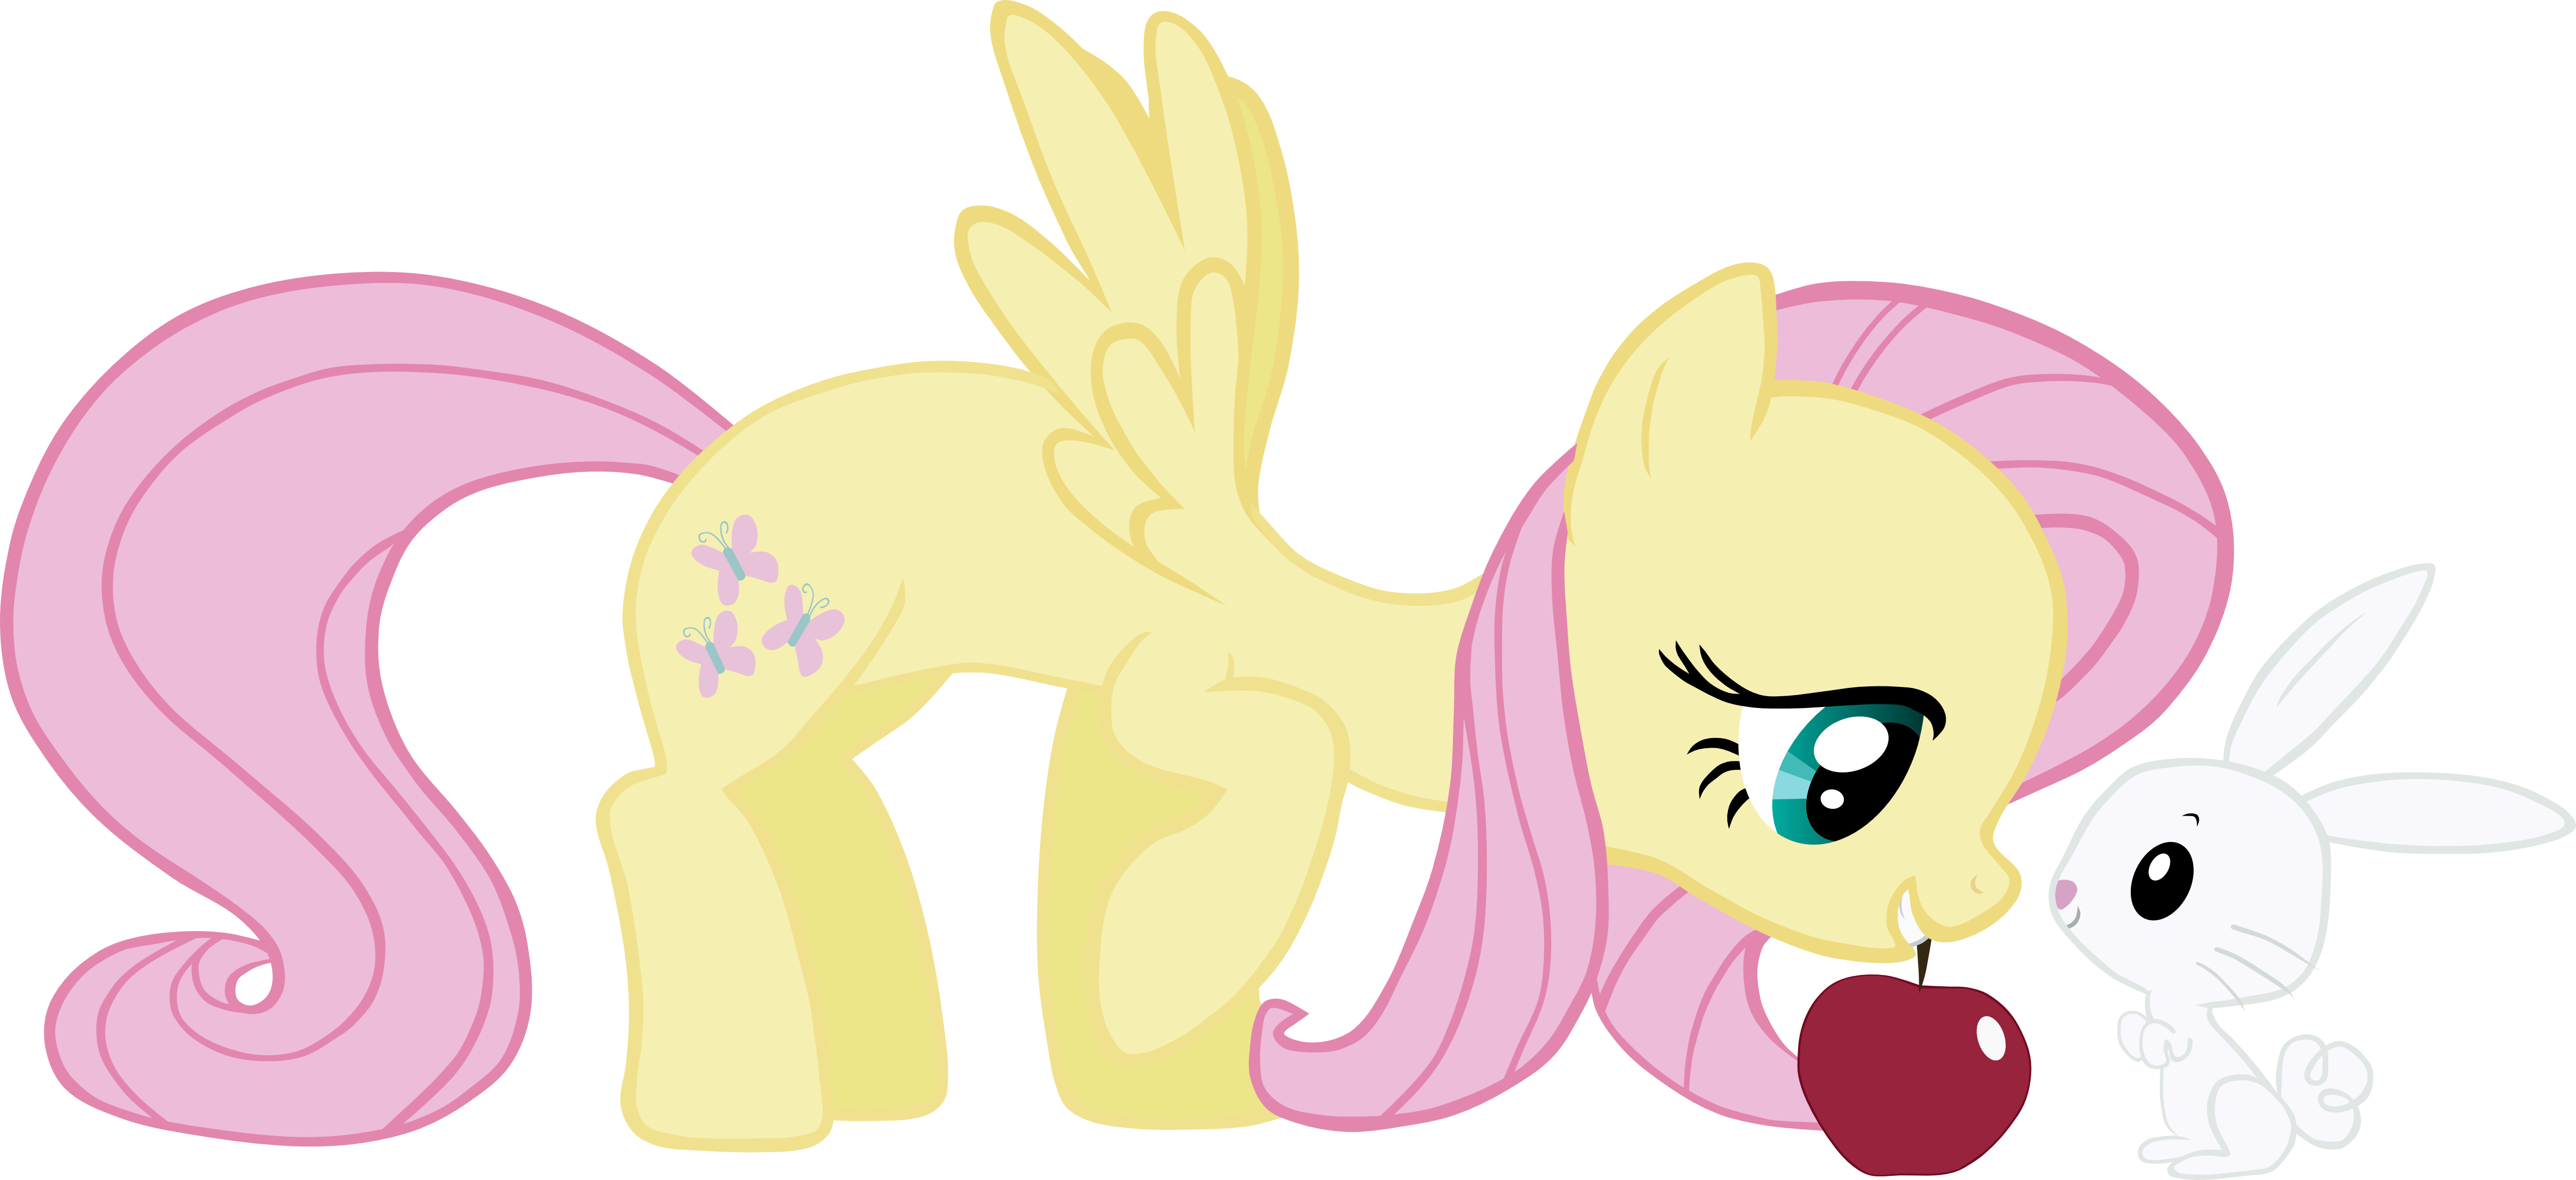 [Bild: fluttershy_and_angel_by_eamon_valda-d4aakwo.png]